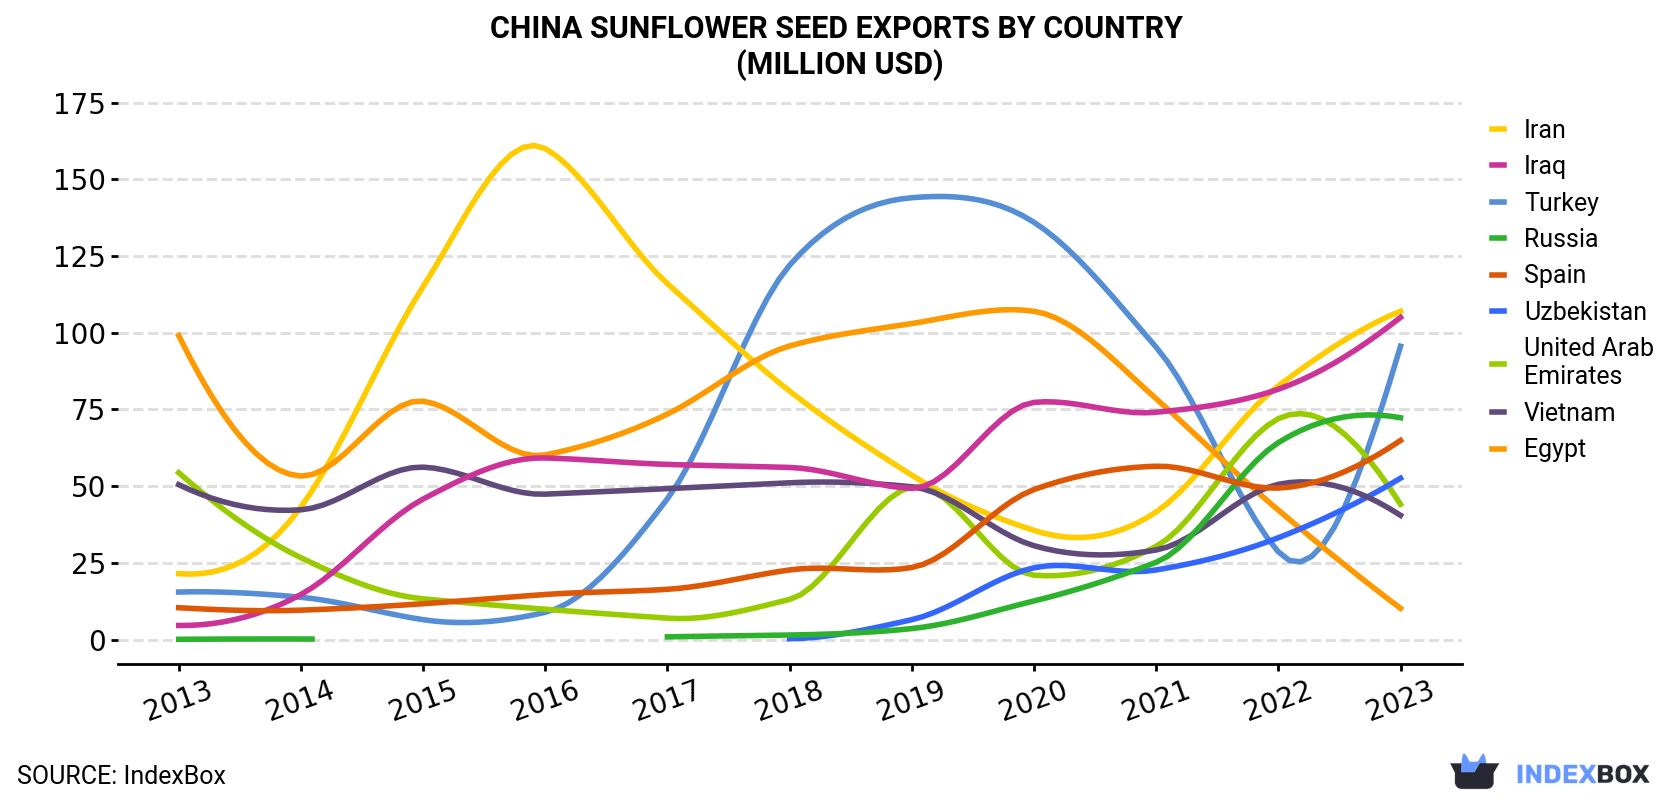 China Sunflower Seed Exports By Country (Million USD)